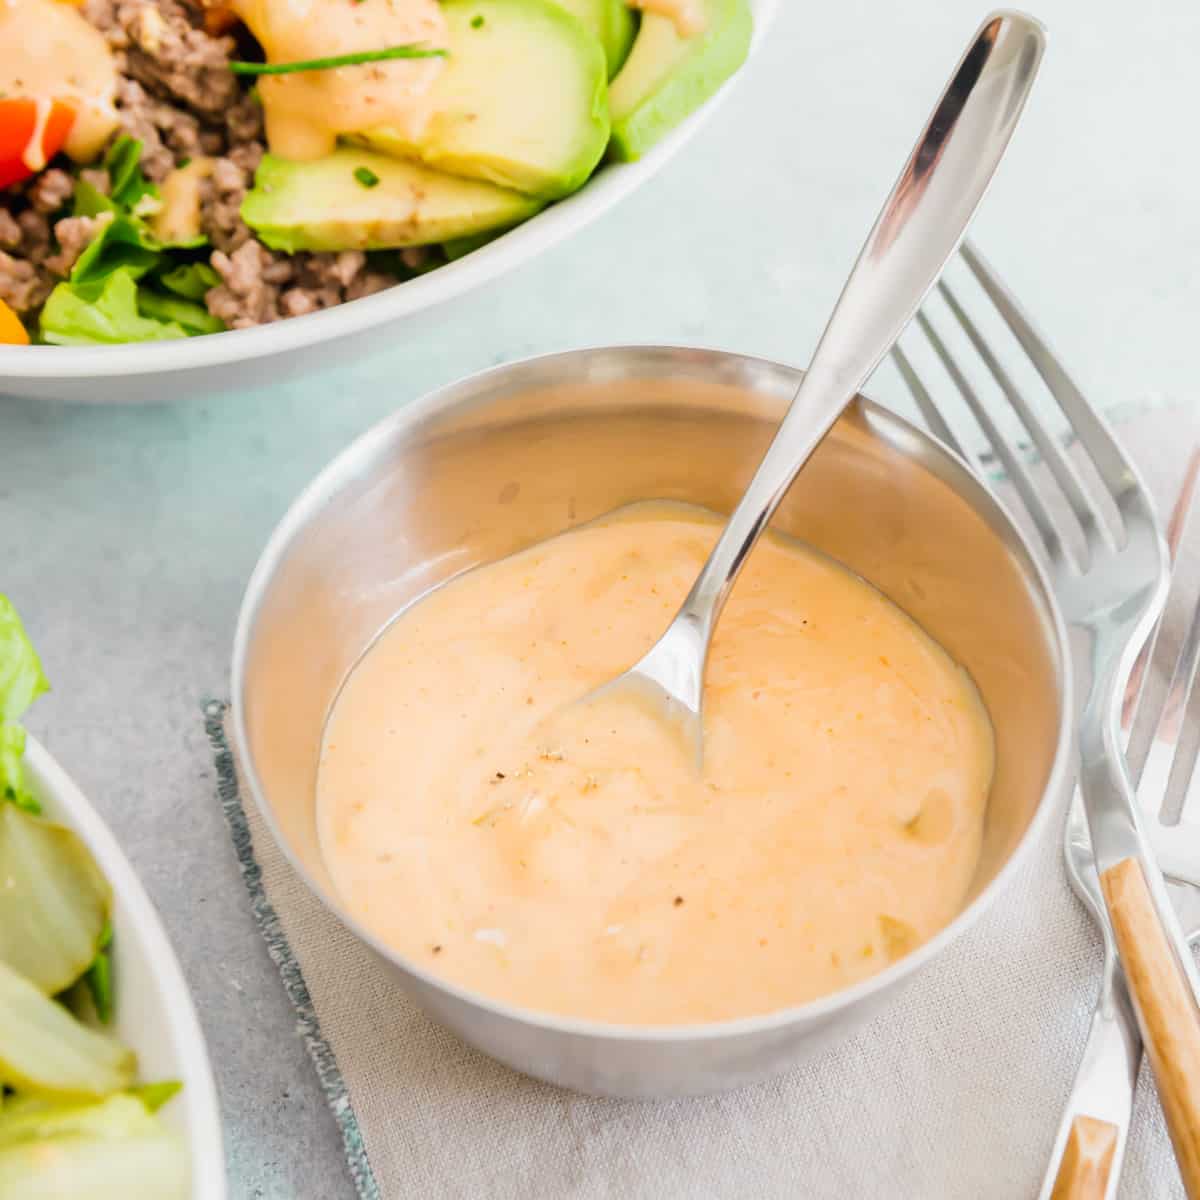 This homemade burger sauce is a healthier spin on traditional "special sauce" recipes. 